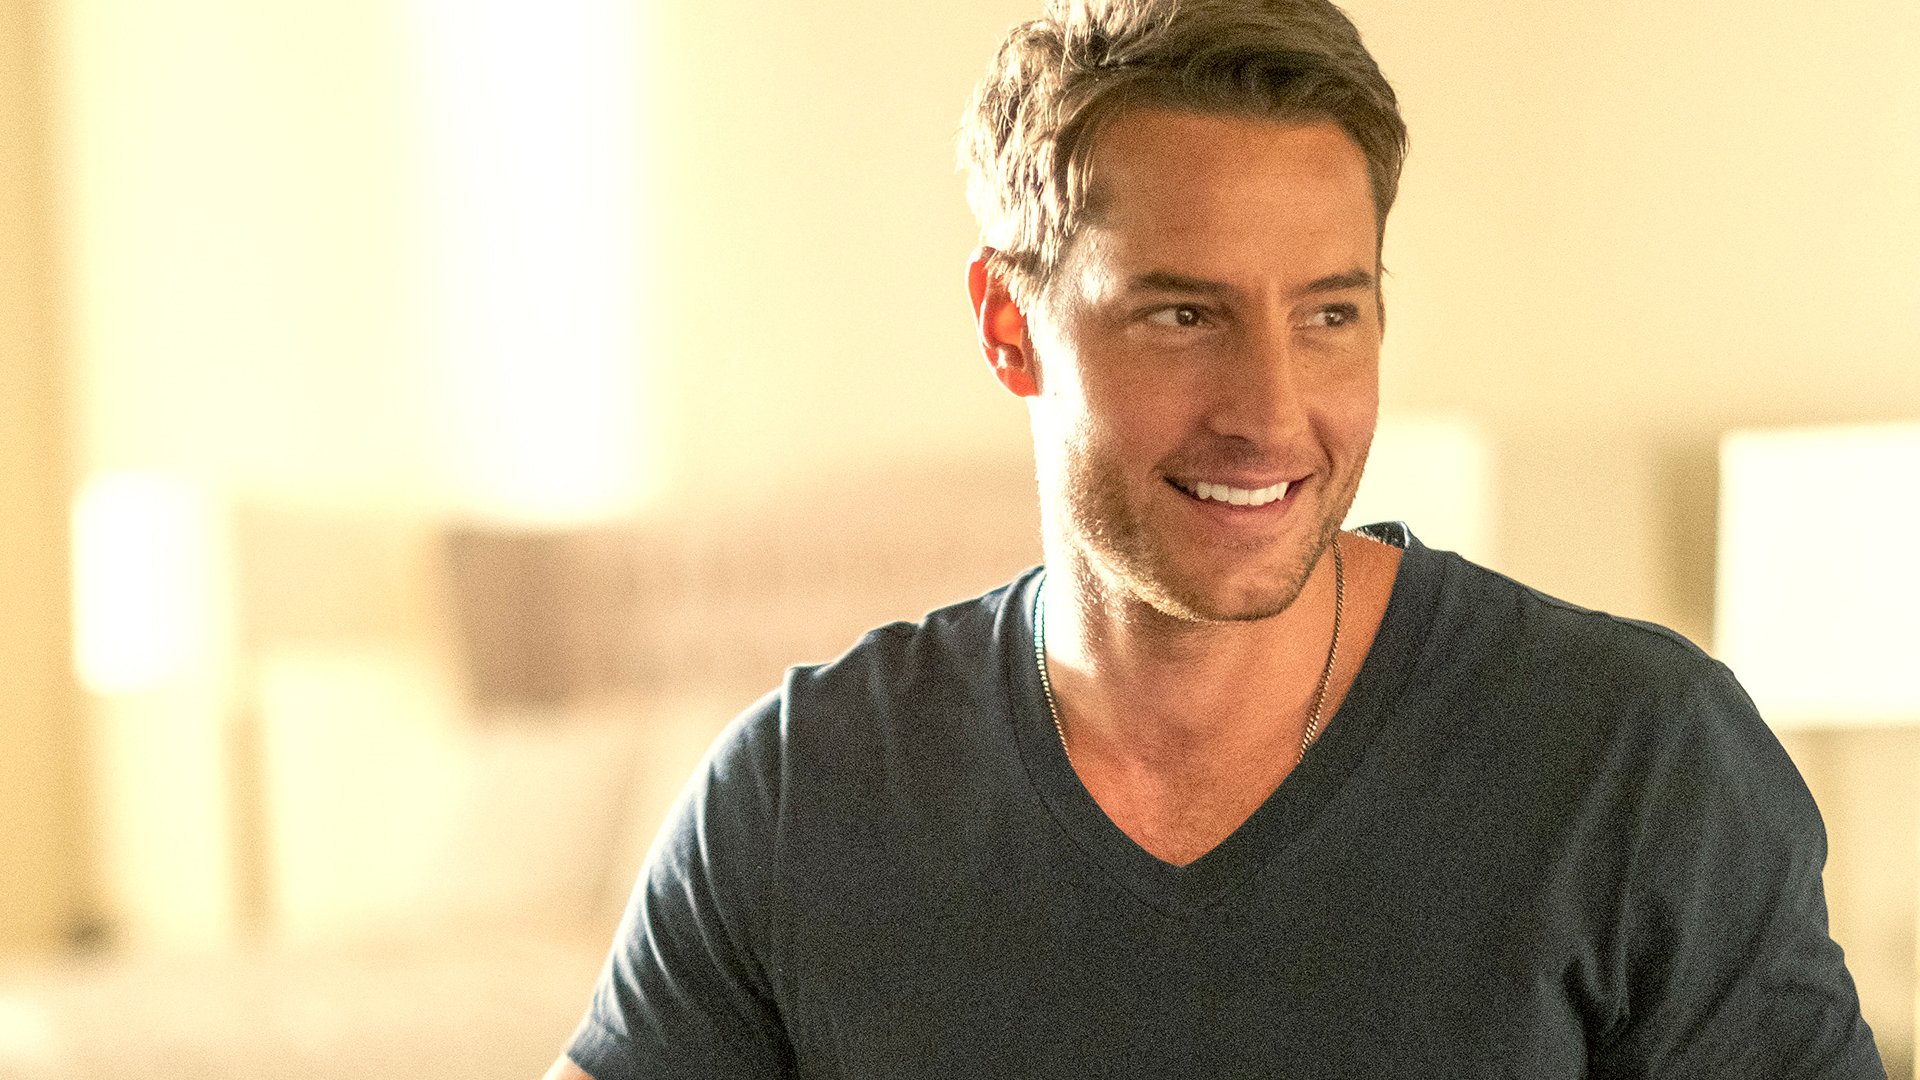 Justin Hartley as Kevin smiles at someone in ‘This Is Us’ Season 5 Episode 16